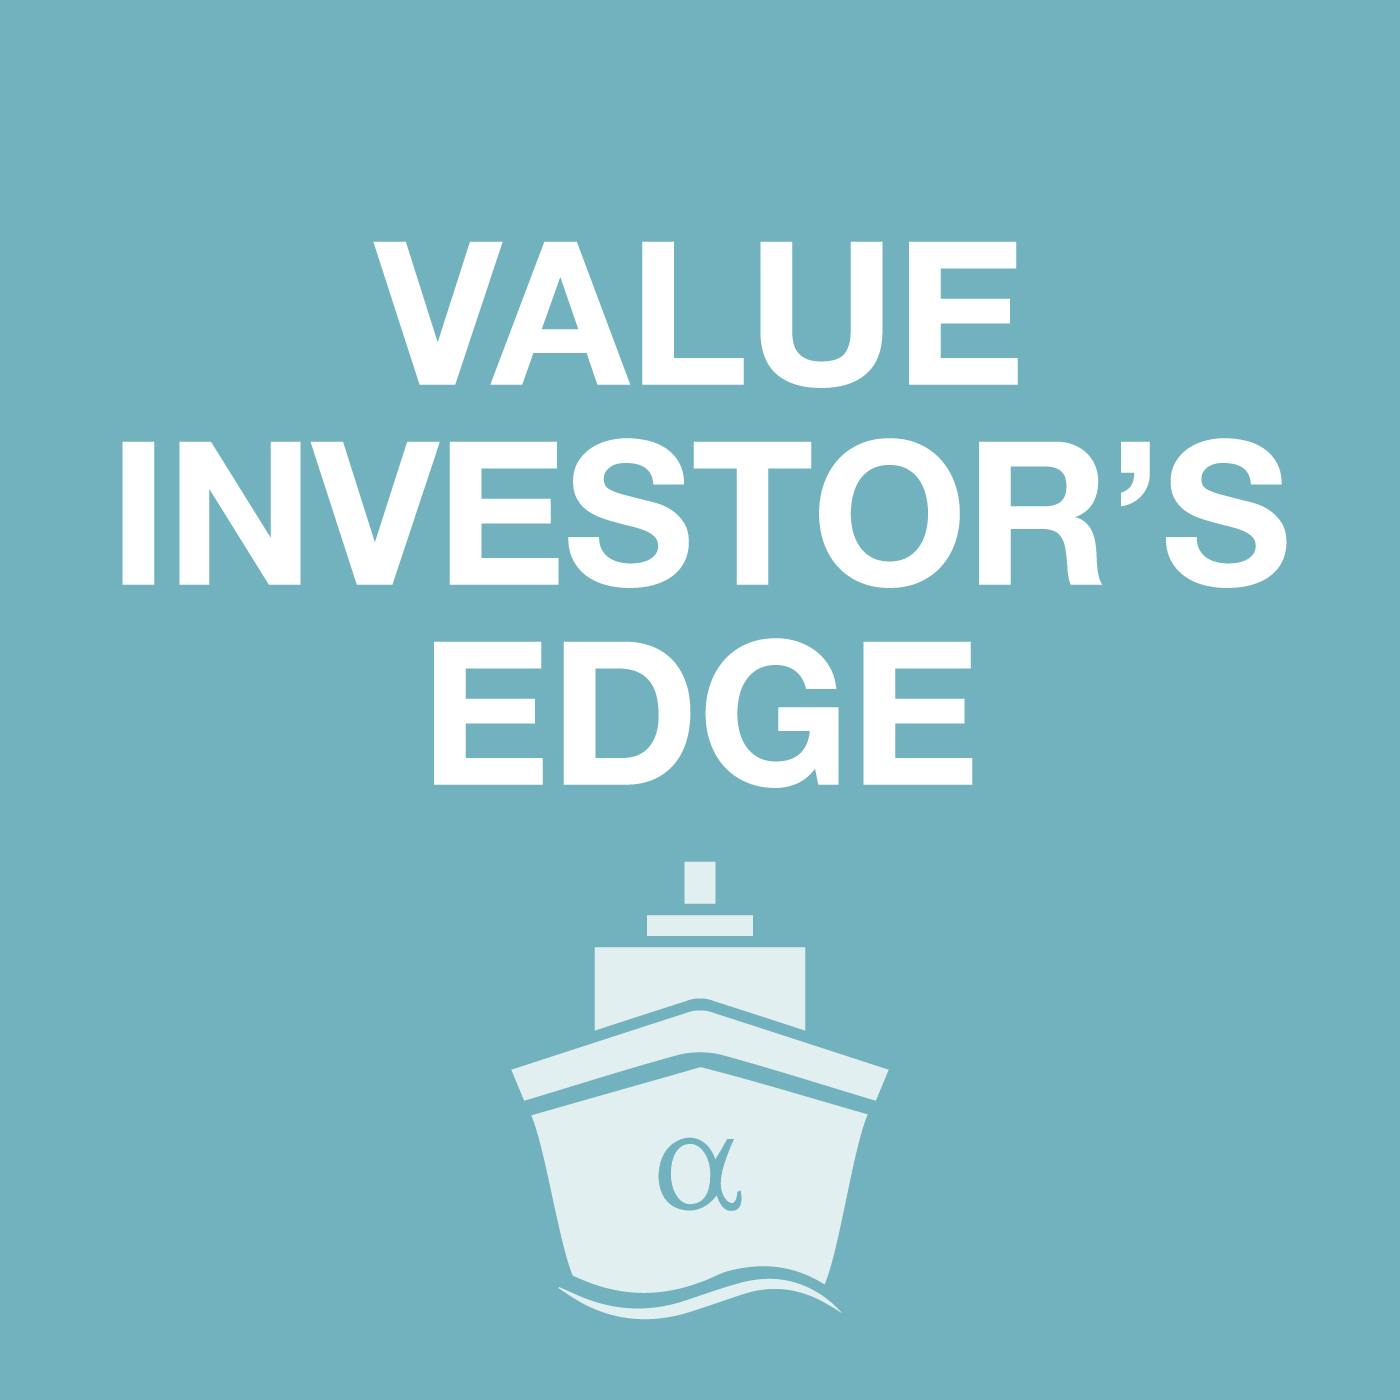 Value Investor's Edge Live #15: Virtual Investor Forum on COVID-19 and Oil Price War, With International Seaways Management